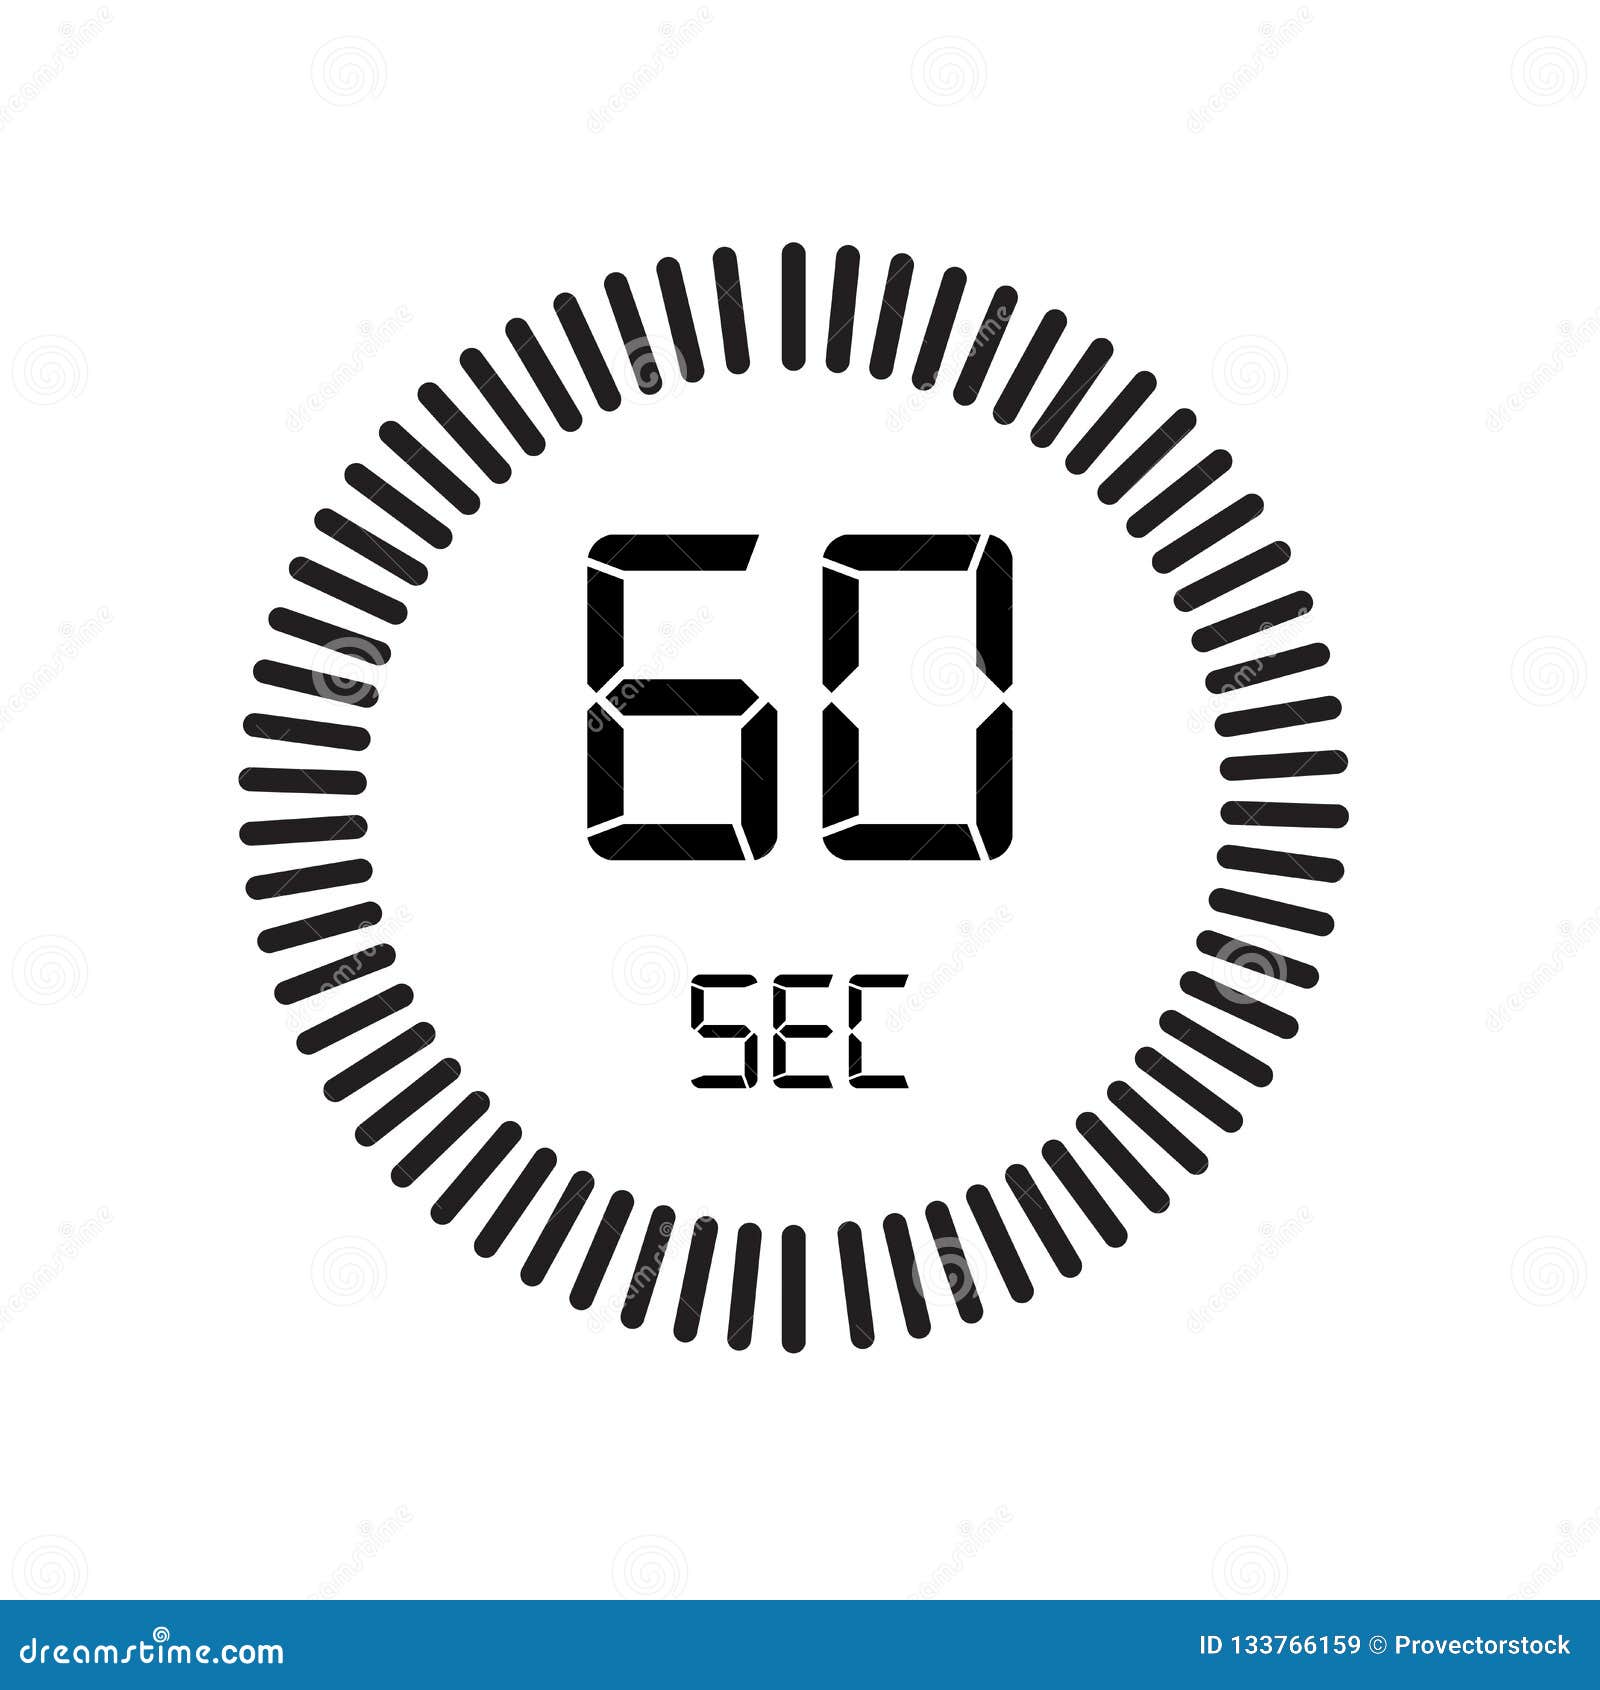 The 60 Seconds Digital Timer. Clock and Watch, Countdown Symbol Isolated on White Background, Stopwatch Vector Icon Stock Vector - Illustration of graphic, 133766159